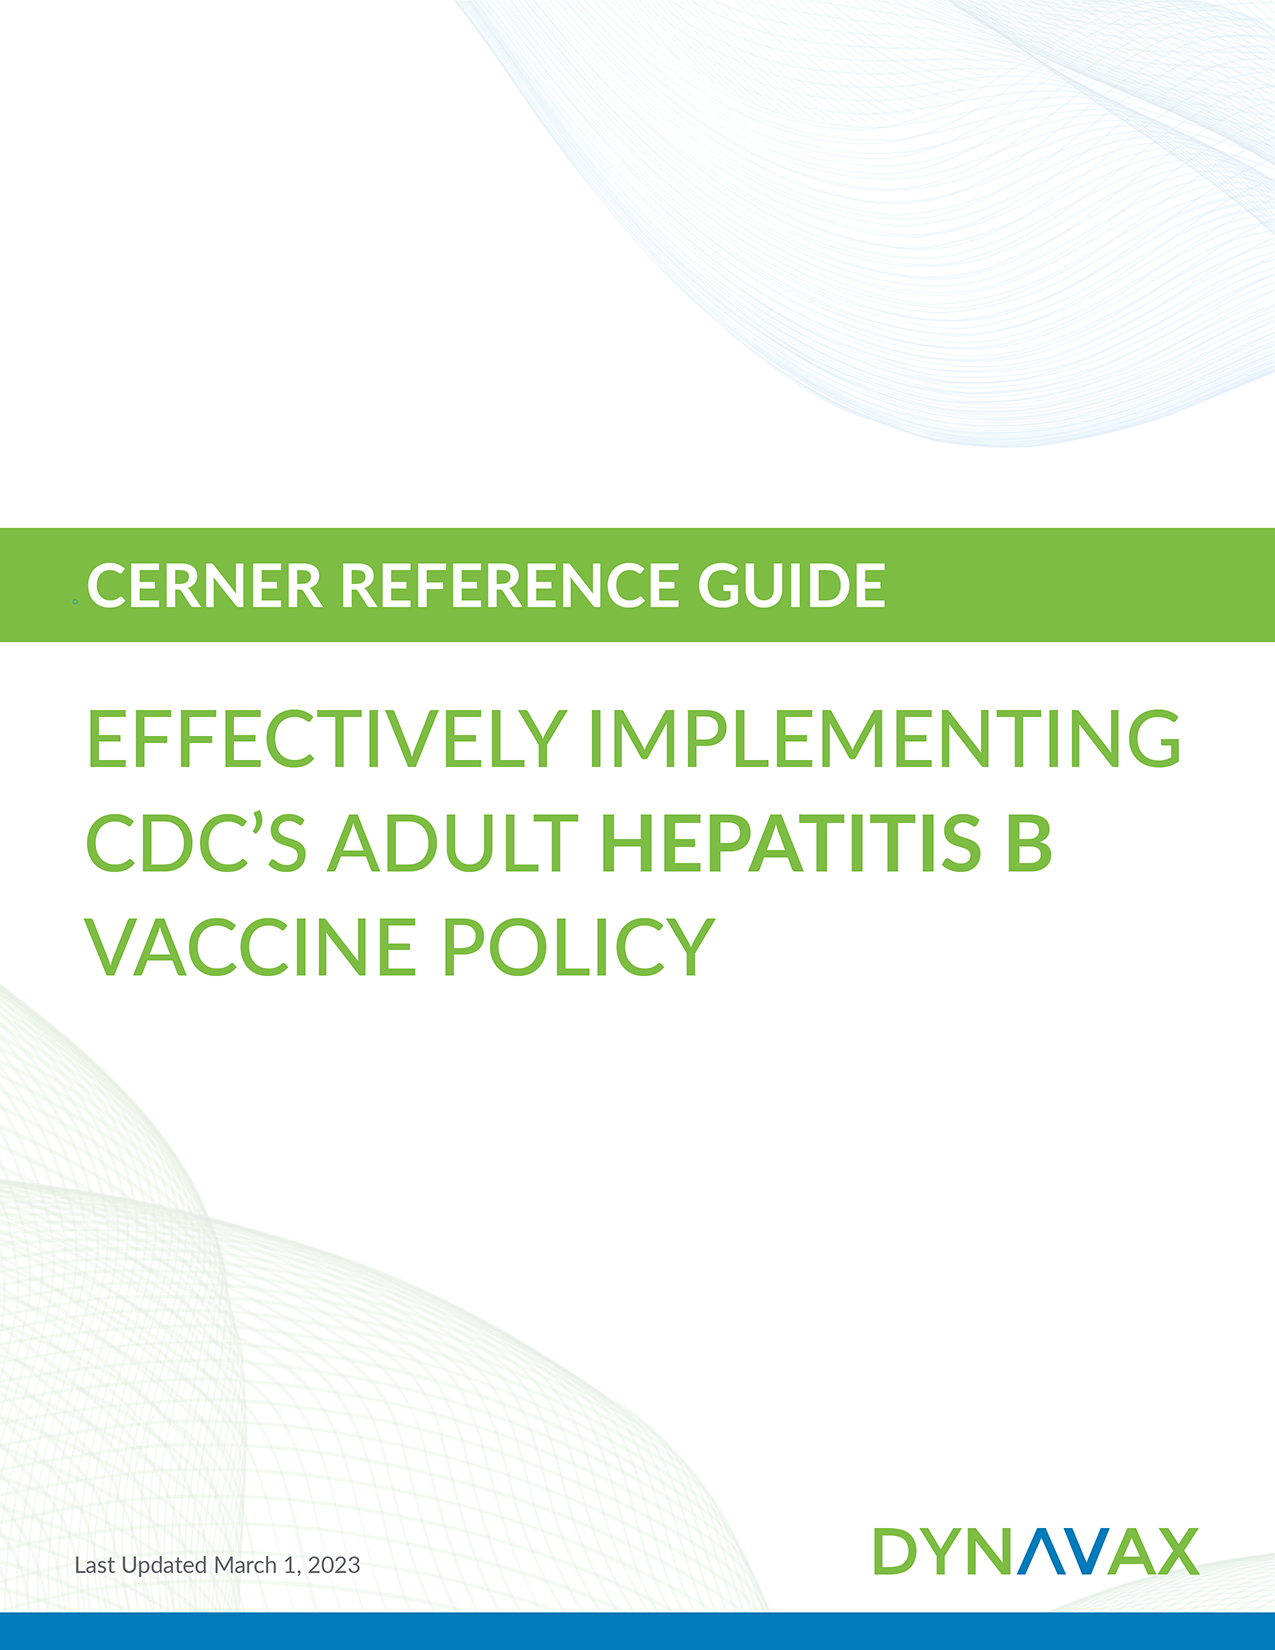 Cerner Reference Guide for implementing the CDC adult hepatitis B vaccine policy.